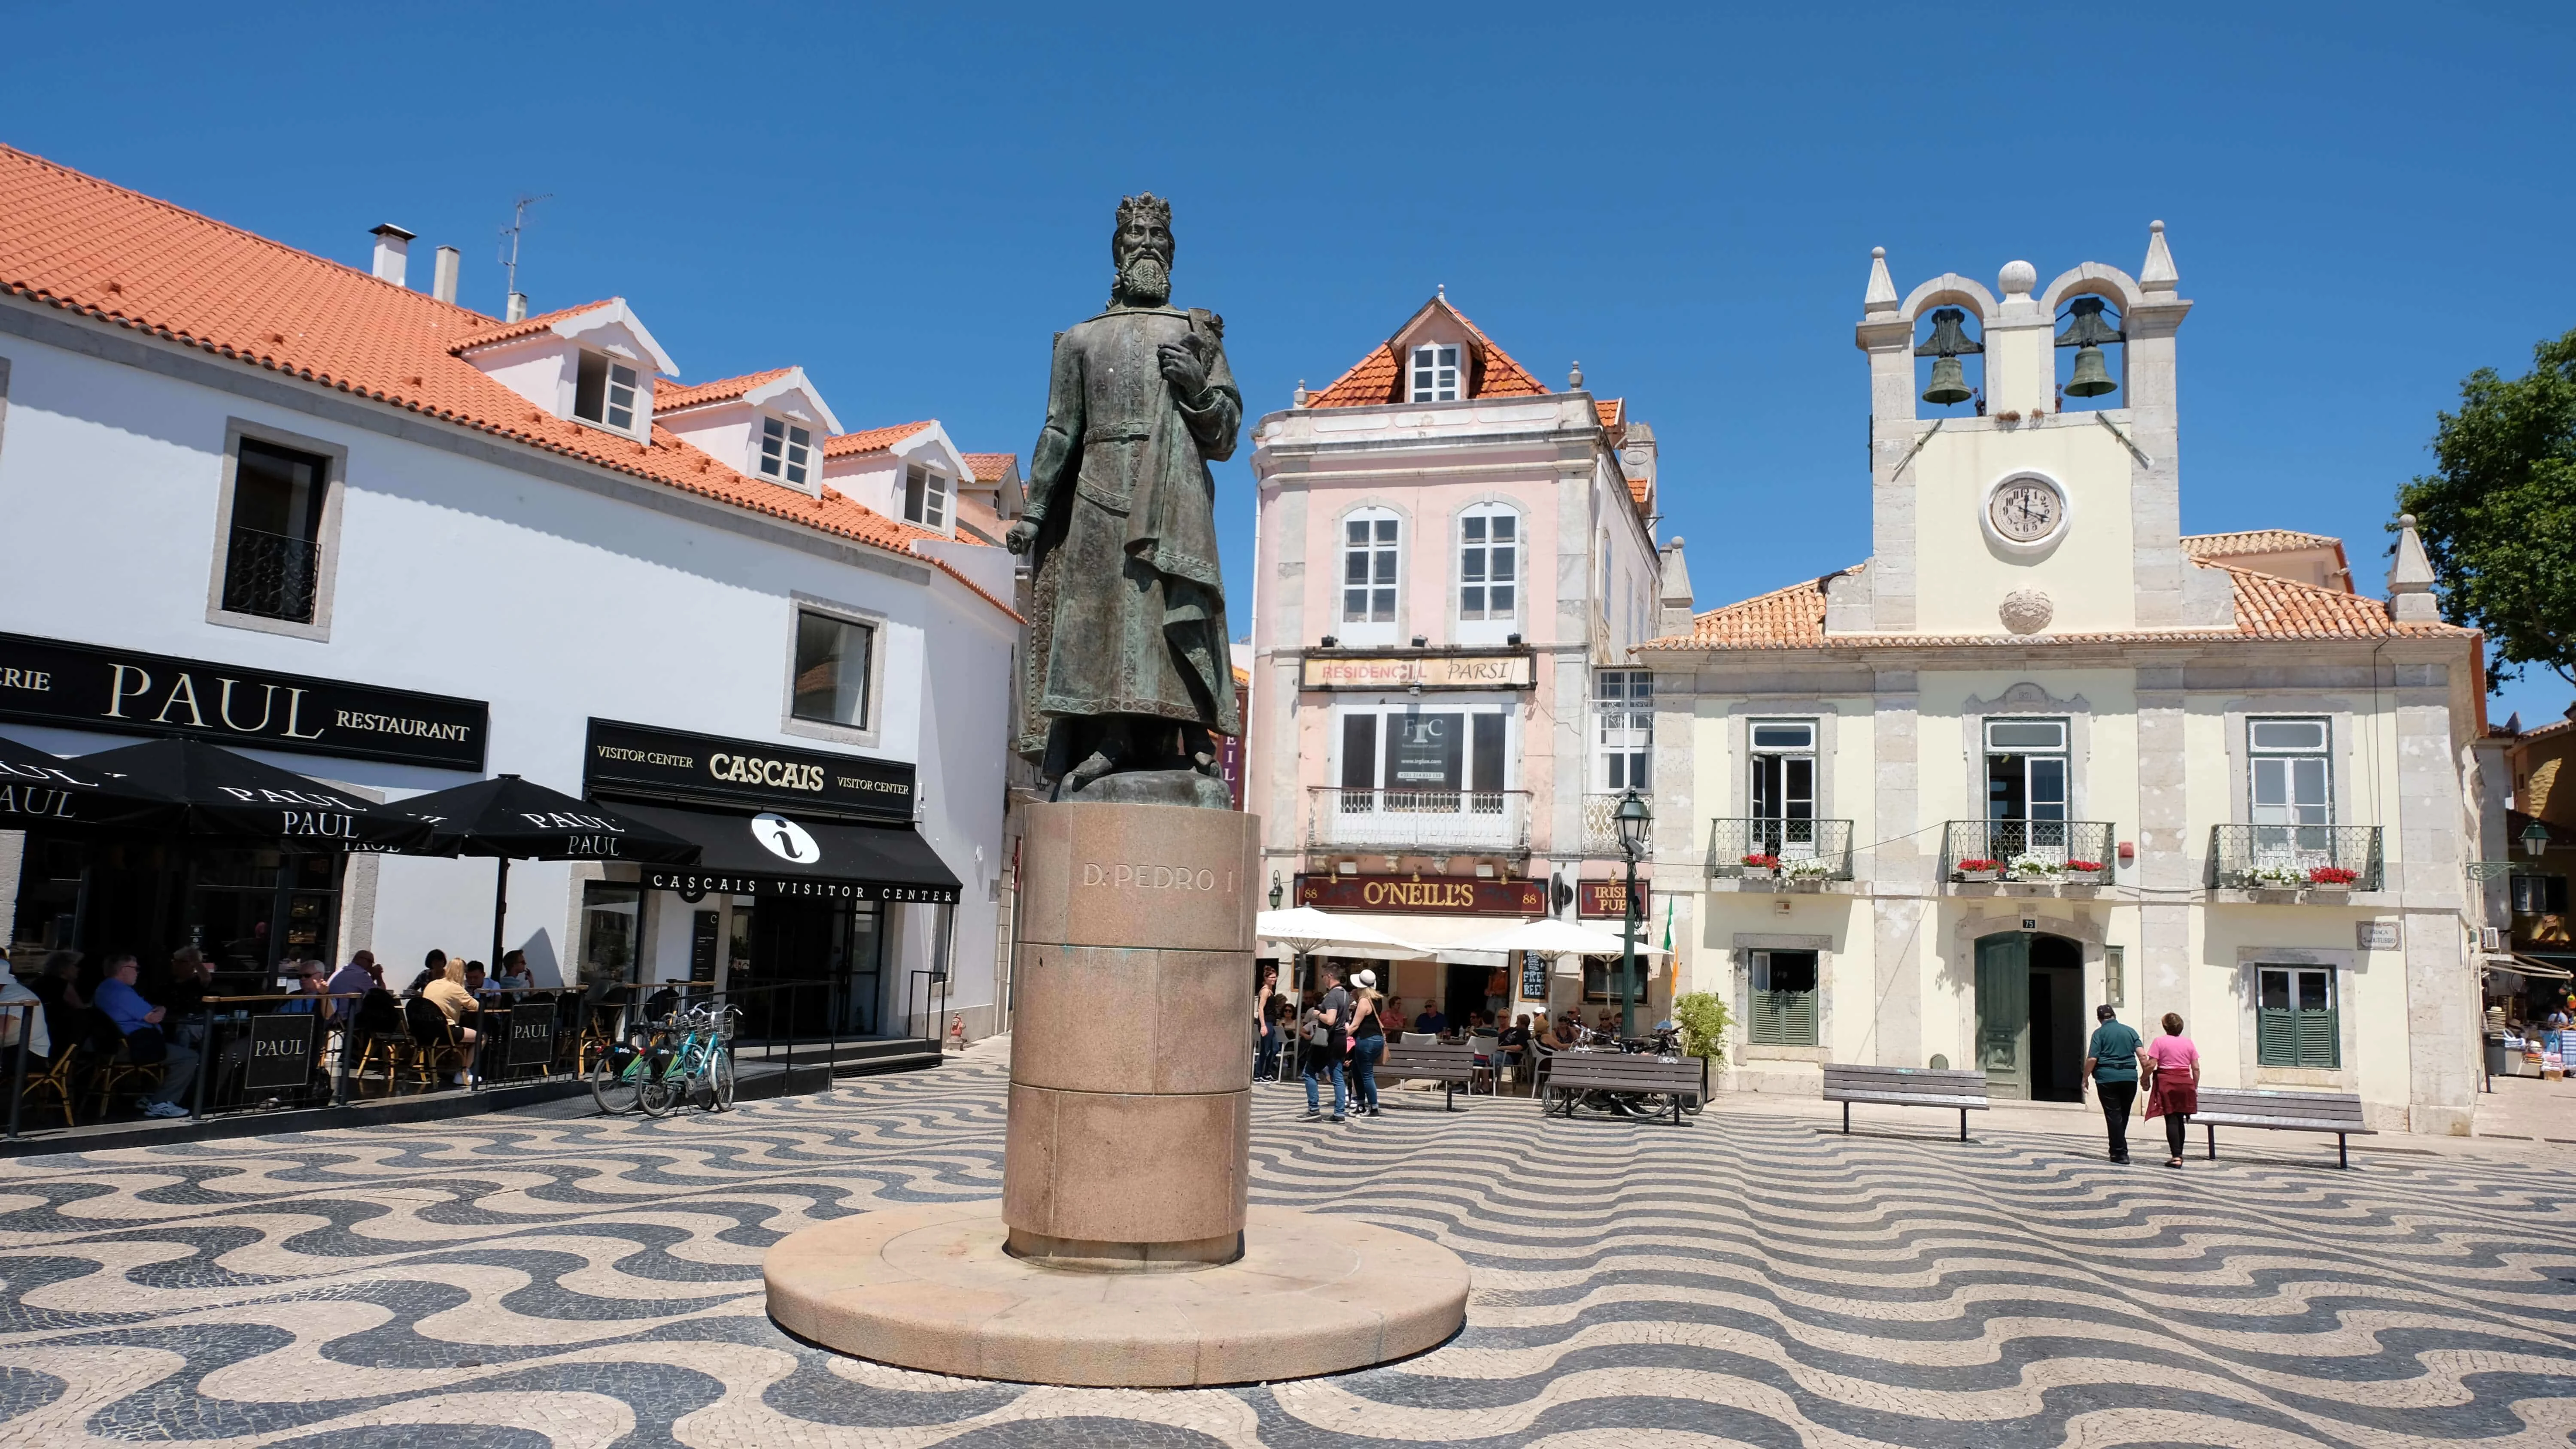 Start in the main square of Cascais(this is the square with O’Neil Irish pub, Paul’s cafe and hotel Baia)